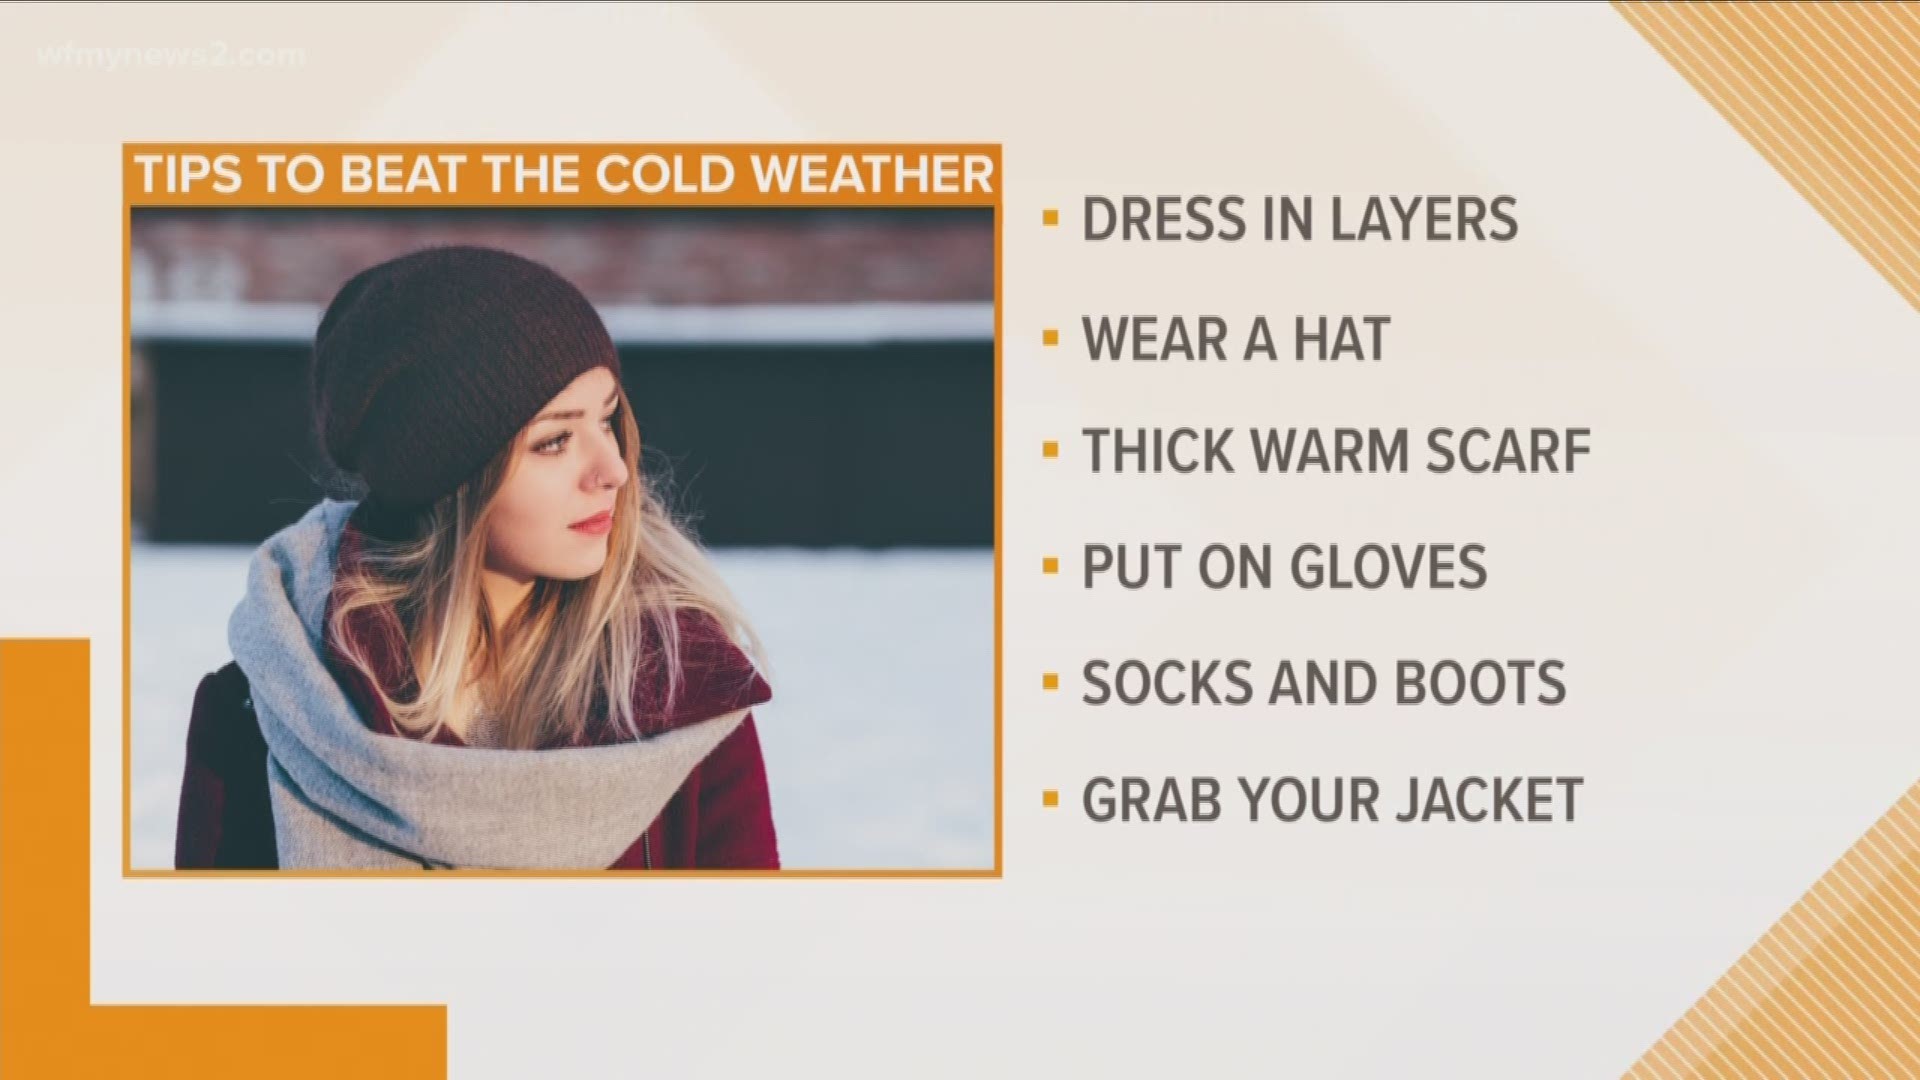 Tips To Keep You And Your Pets Safe In Cold Weather